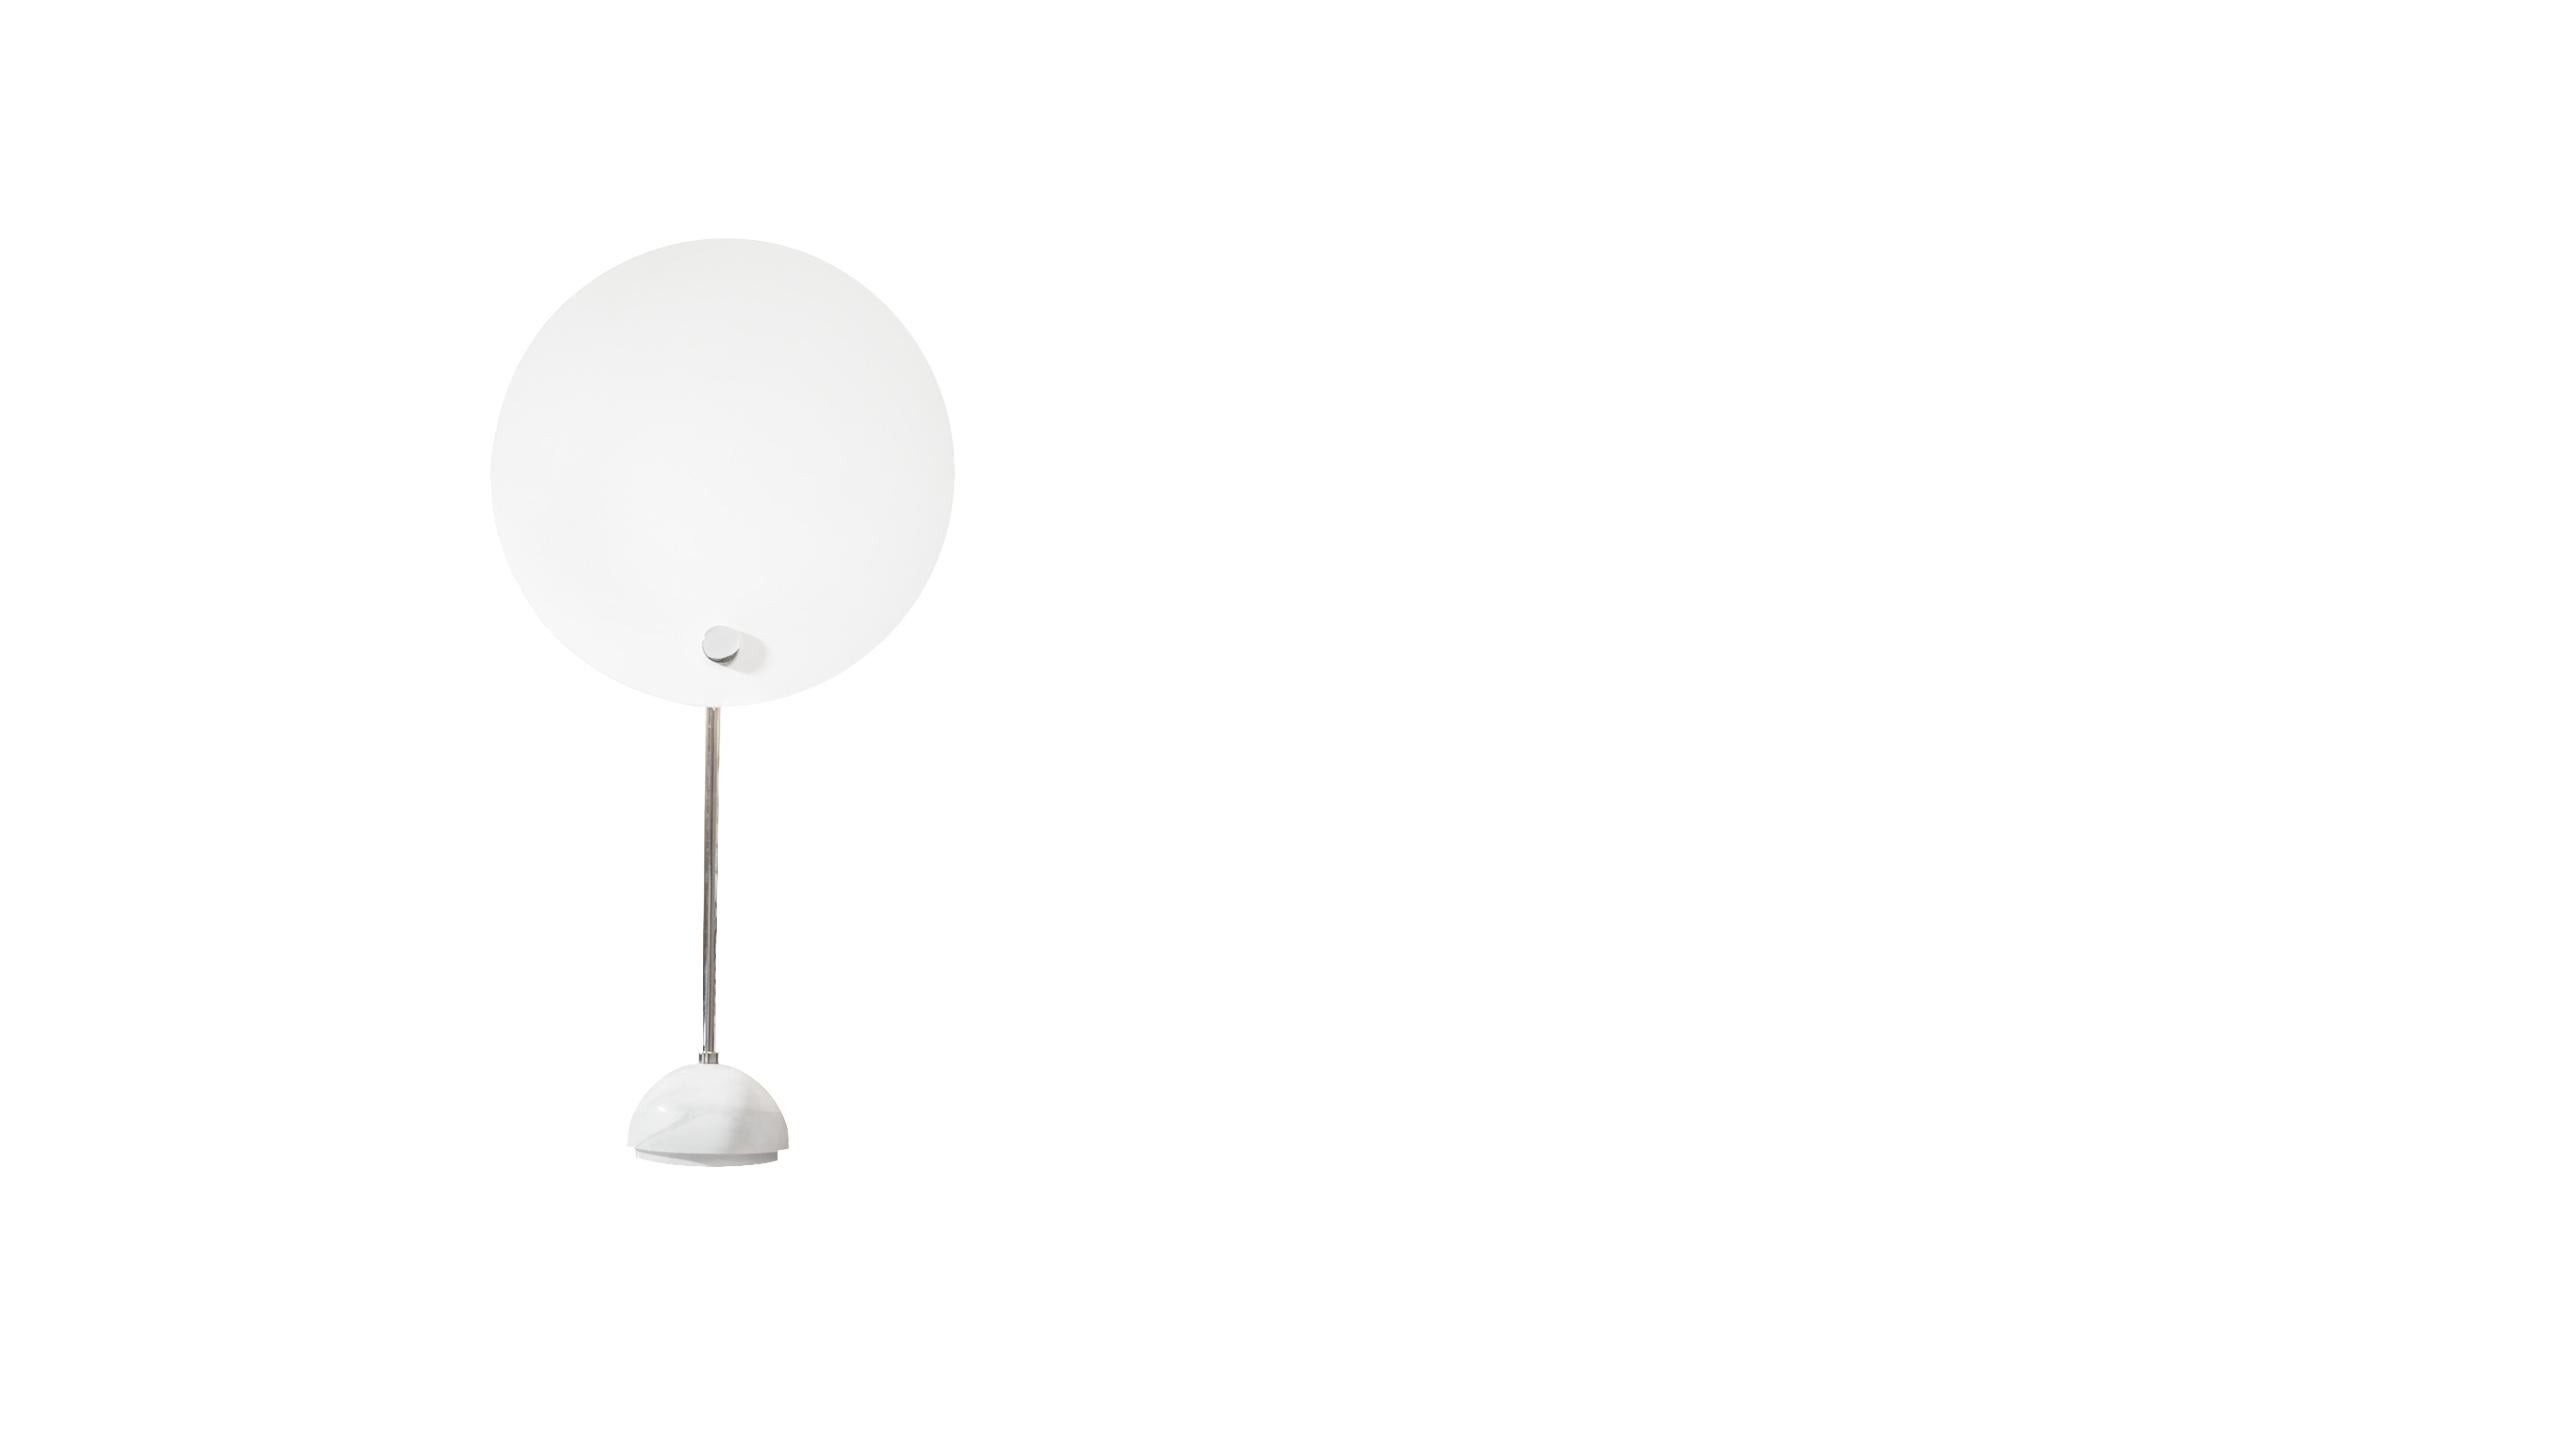 KUTA table
Table lamp with an aluminum circular reflector which shields the lighting distribution, giving the effect of a solar eclipse. The circular screen is painted in white and black, the stem and the metal small parts and hemispherical support